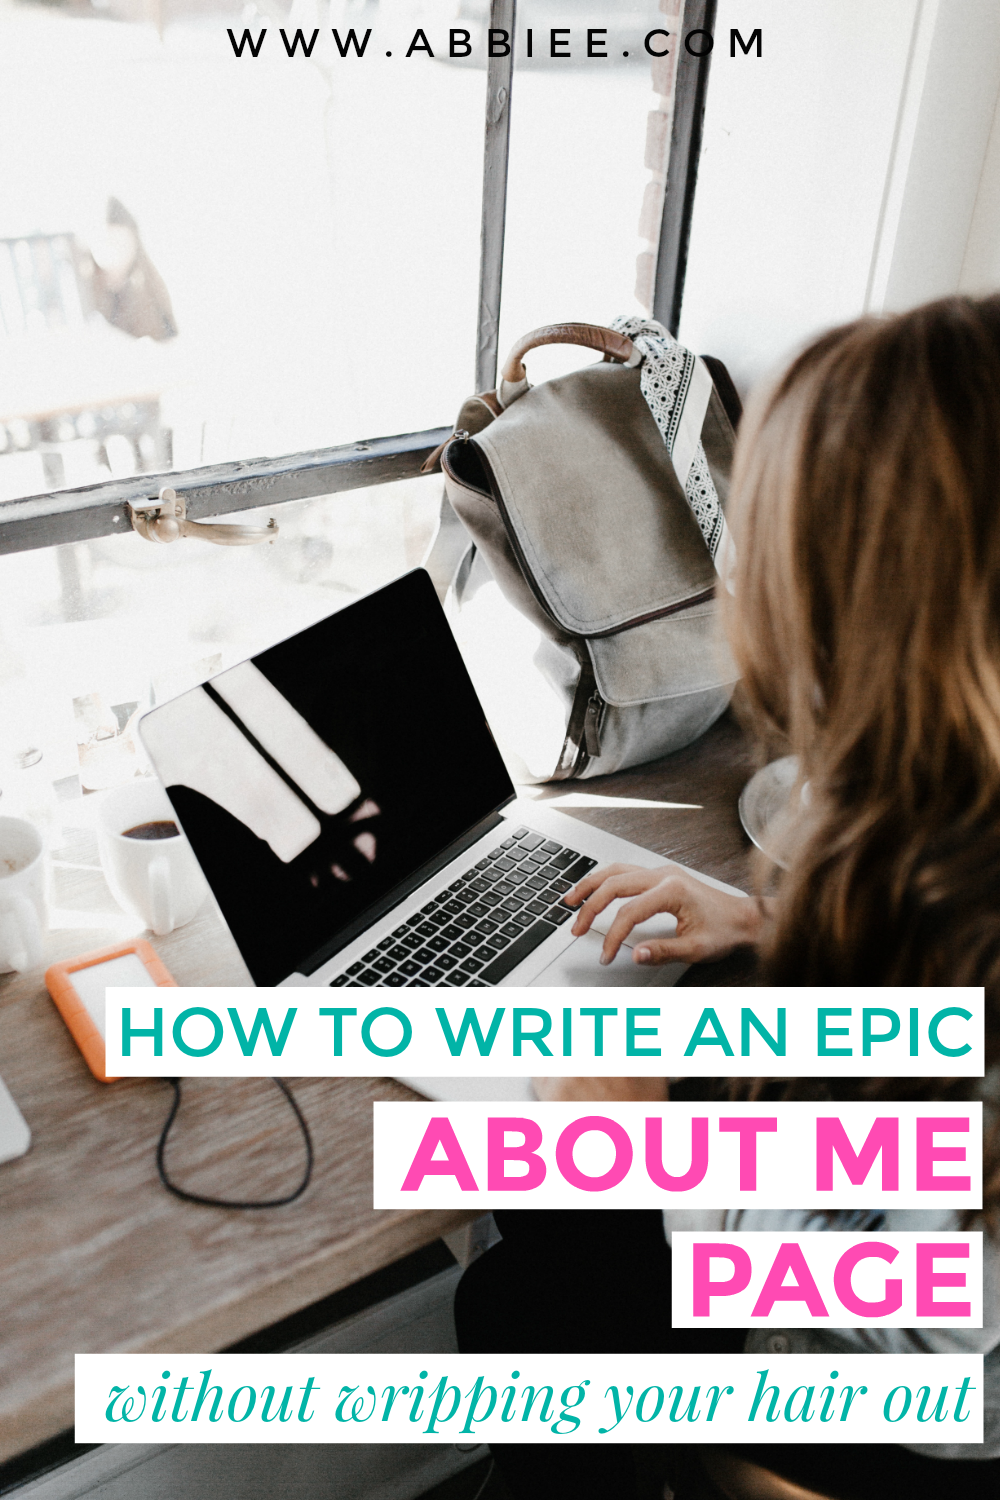 Abbie Emmons - How To Write An Epic "About Me" Page (Without